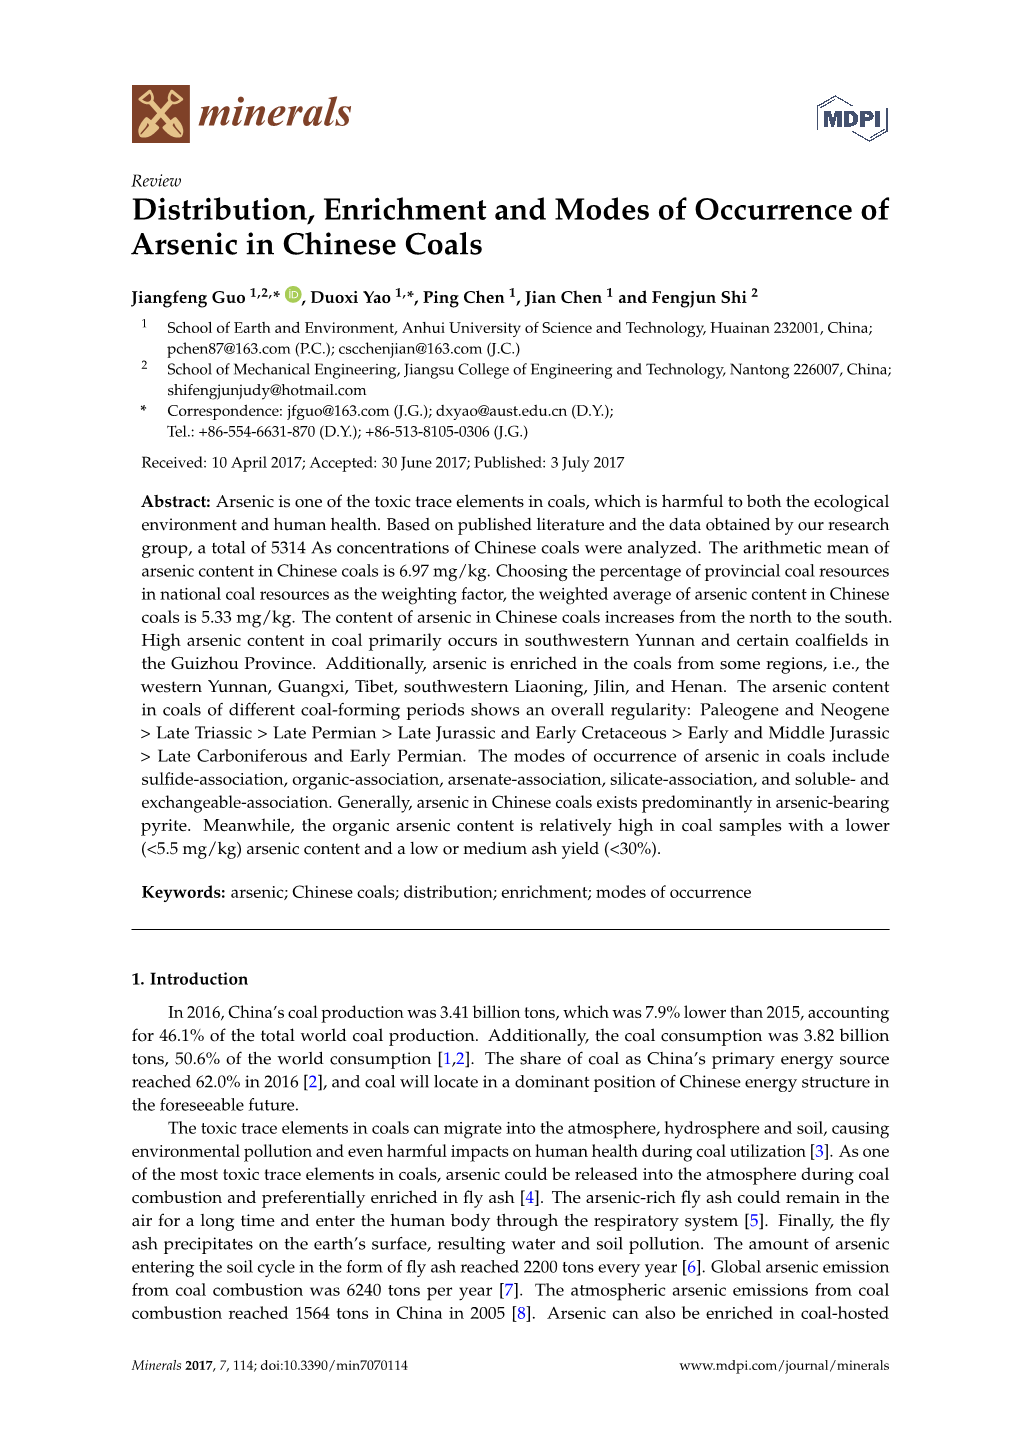 Distribution, Enrichment and Modes of Occurrence of Arsenic in Chinese Coals